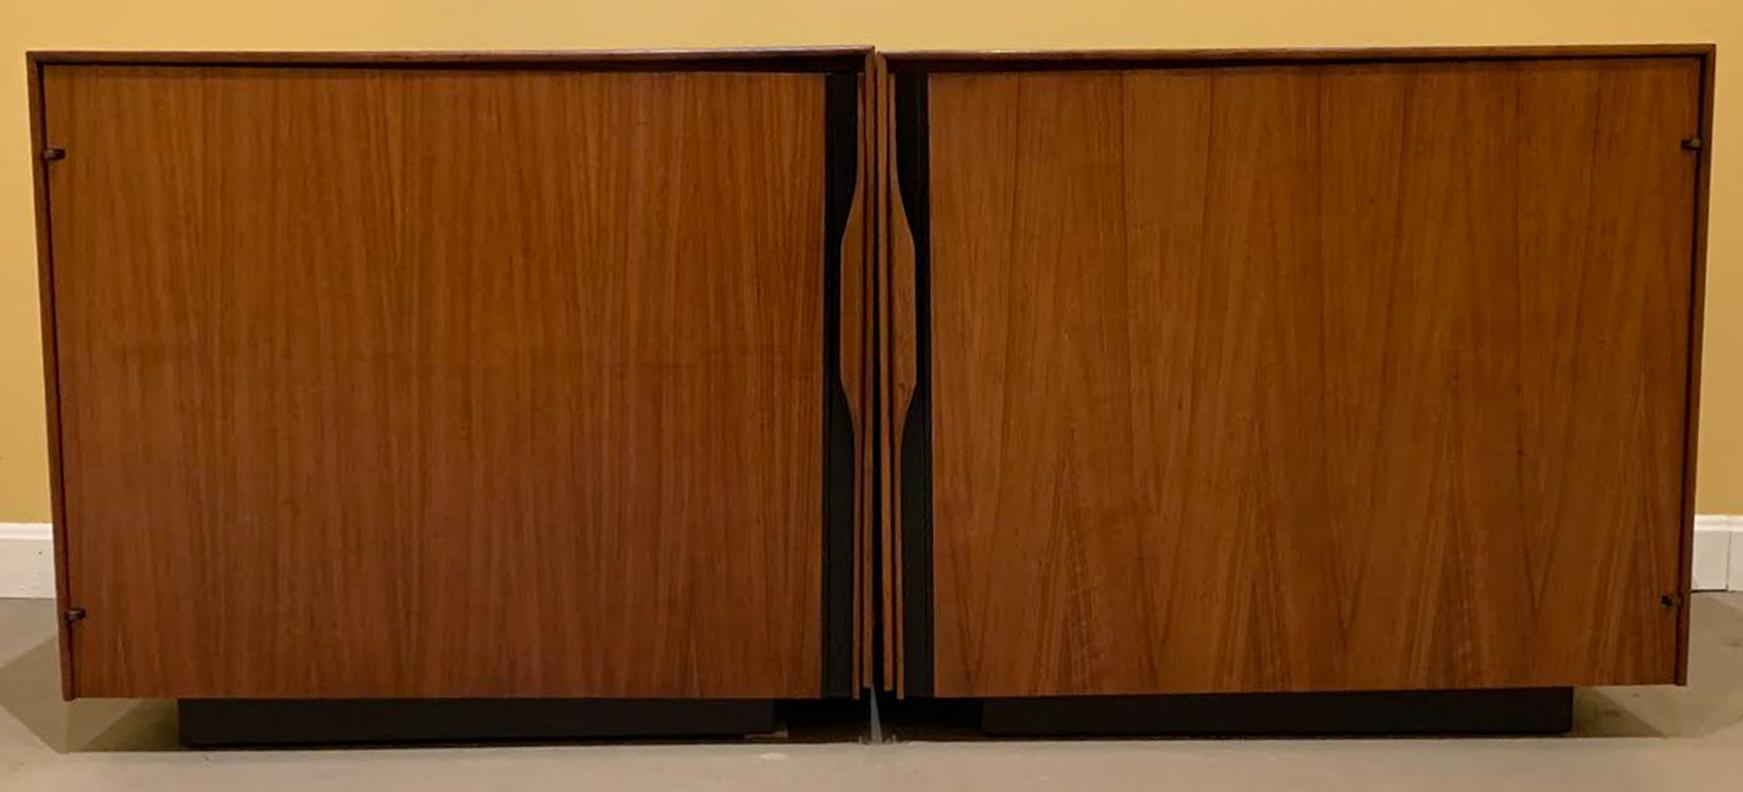 A fine pair of walnut single door side tables or nightstands with a white Formica slide out shelf on each, as well as a single interior shelf, designed by John Kapel for Glenn of California, circa 1960s. Glenn of California was a furniture company